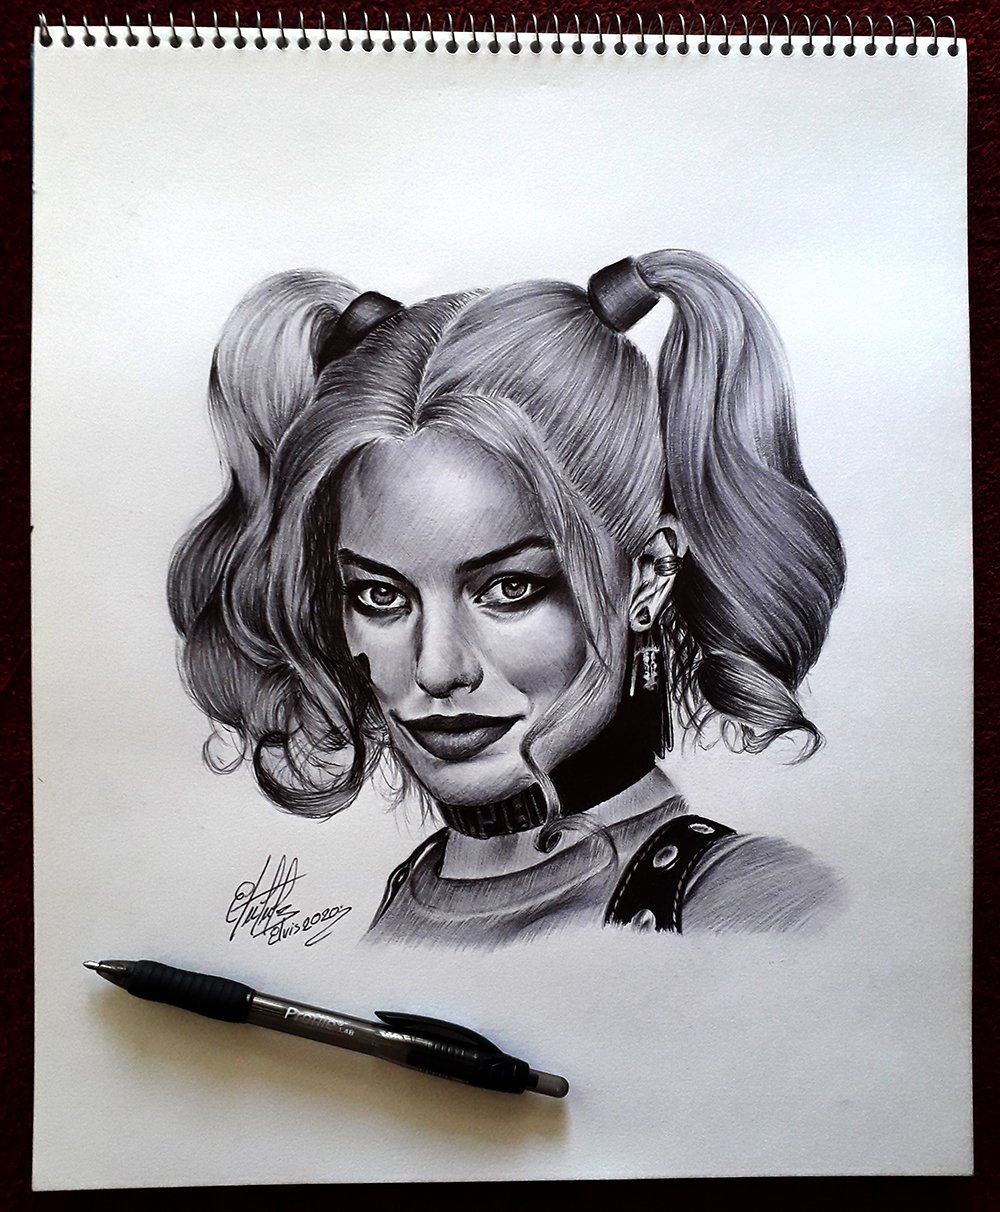 Drawing with Pen to Harley Quinn. 